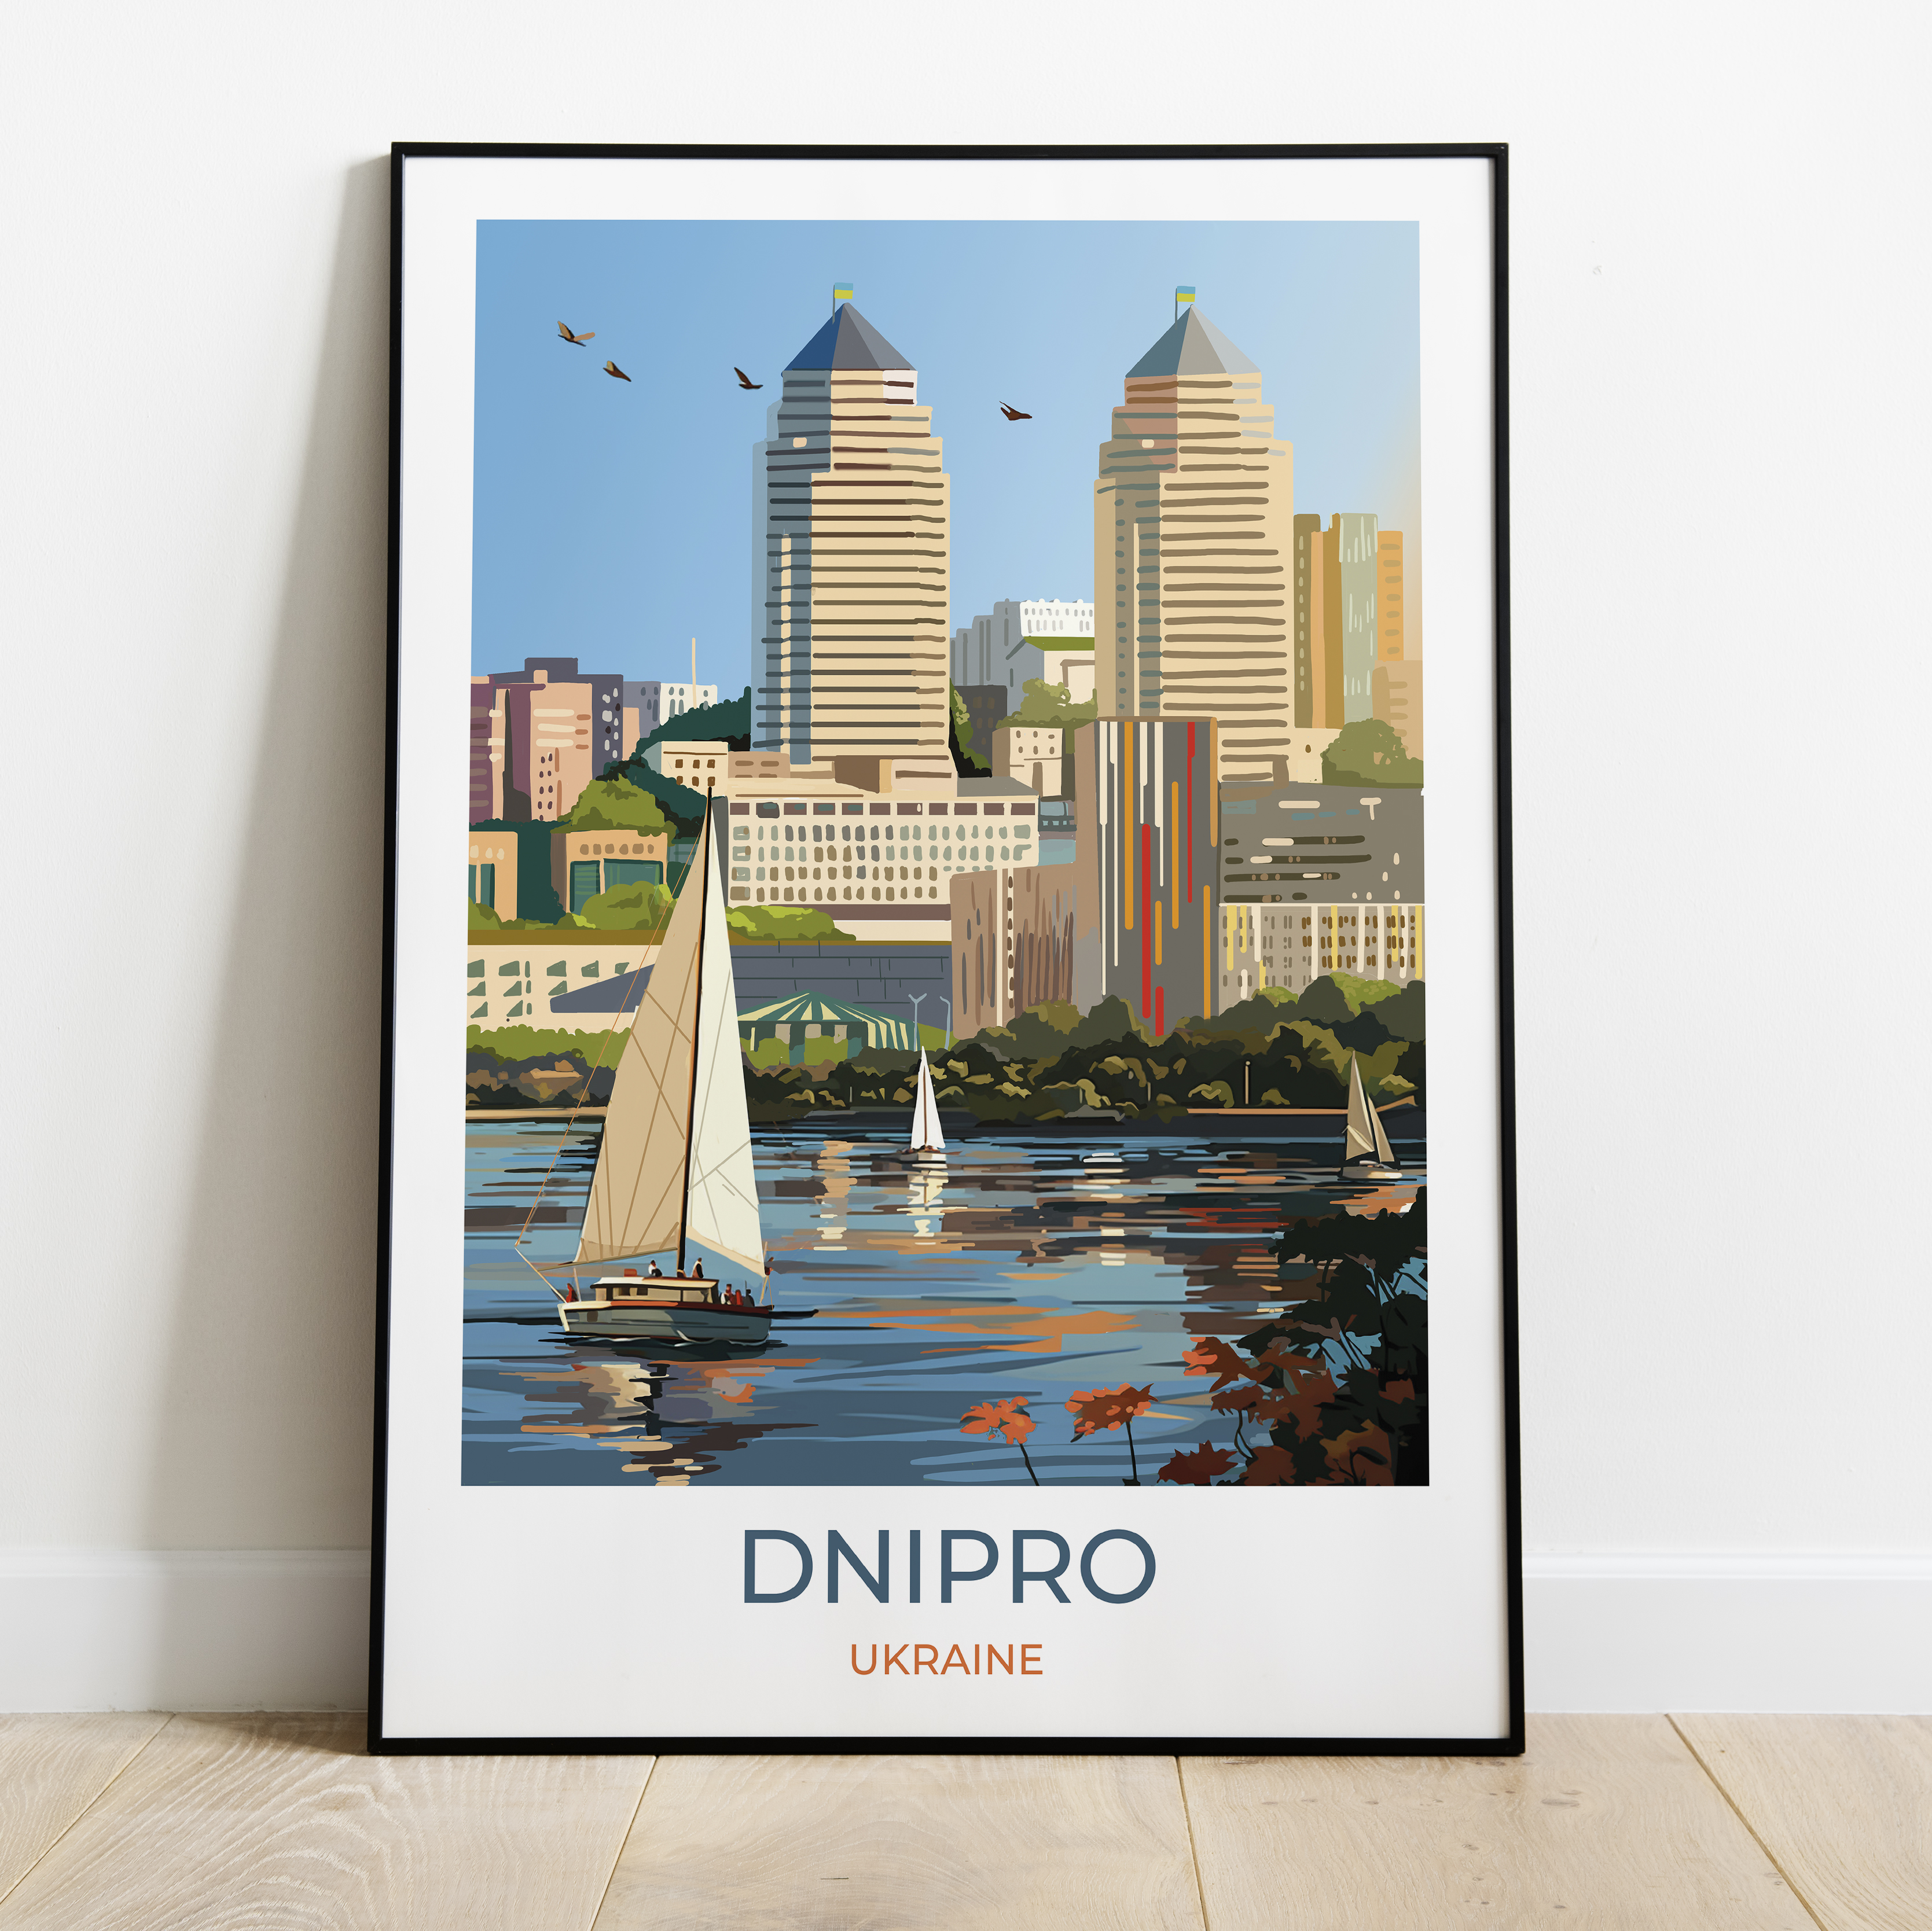 Dnipro - A view of the city